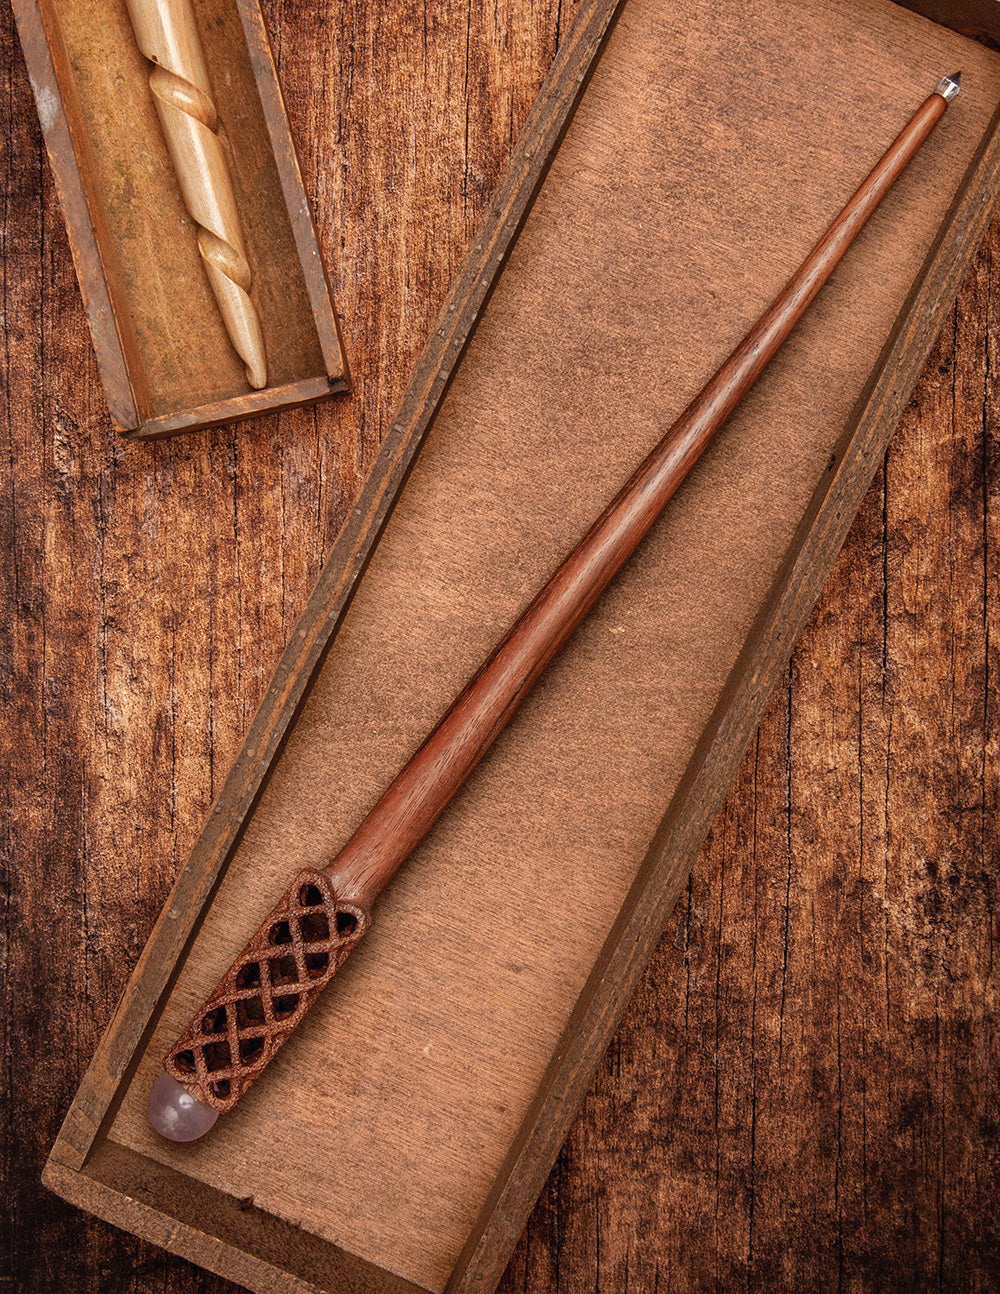 Compendium of Wooden Wand Making Techniques